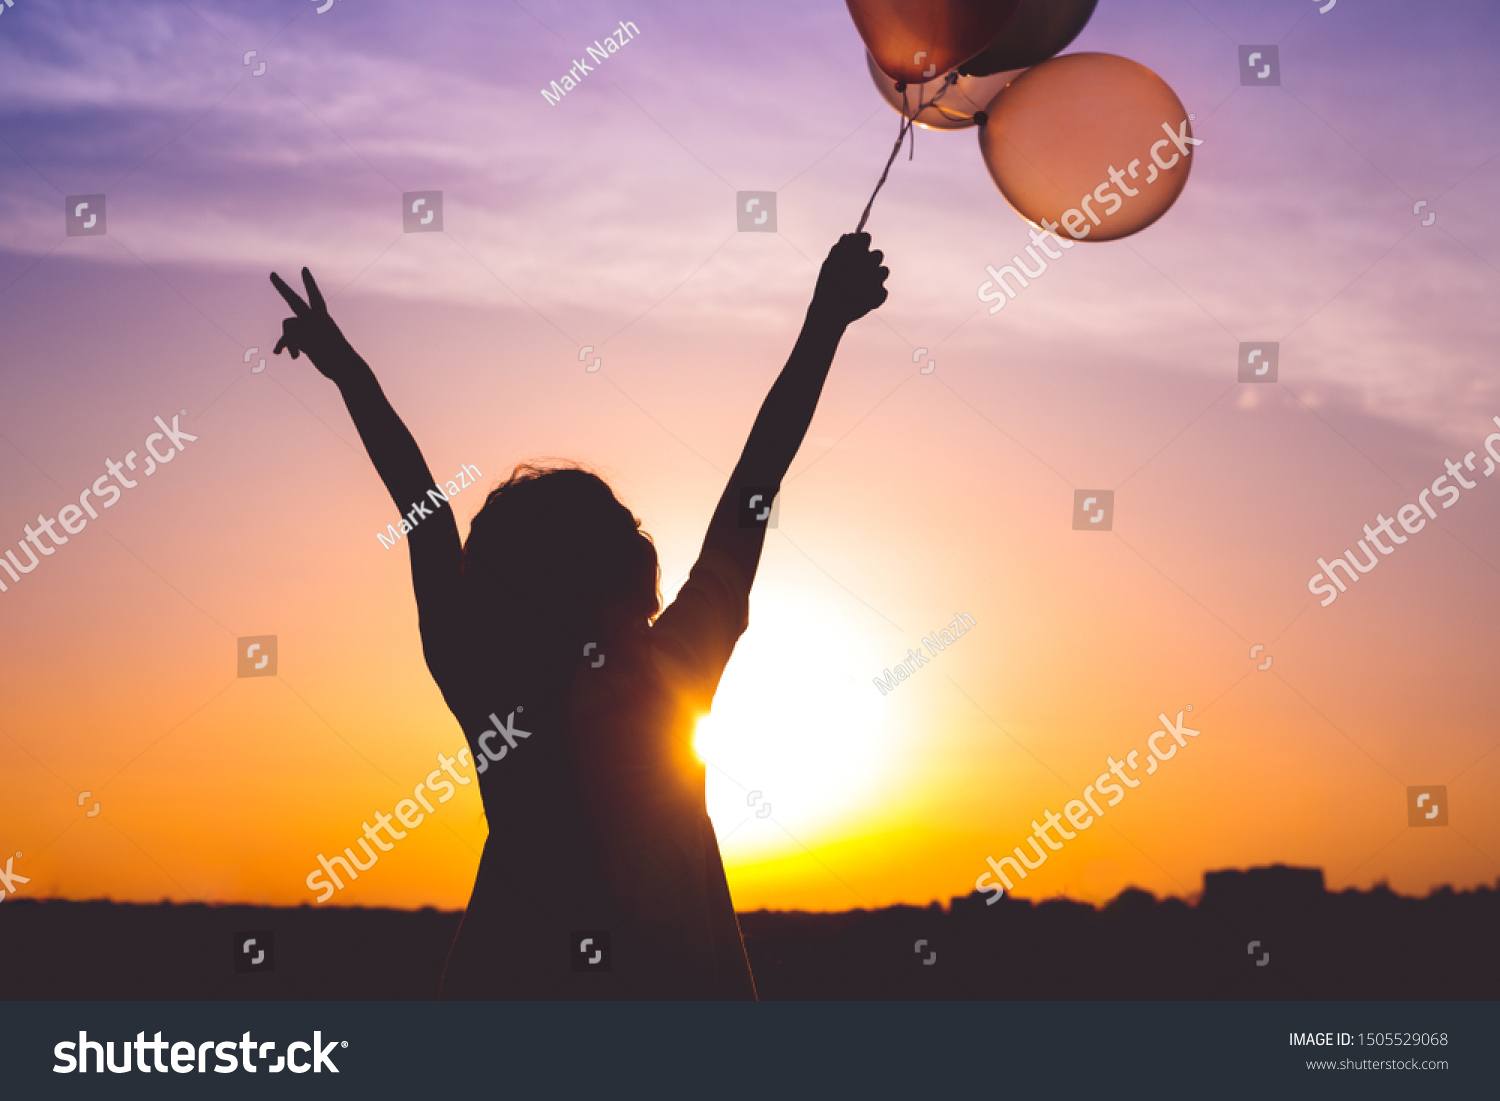 Silhouette of female holding bunch of balloons in raised arms and gesturing V sign against bright sundown sky #1505529068